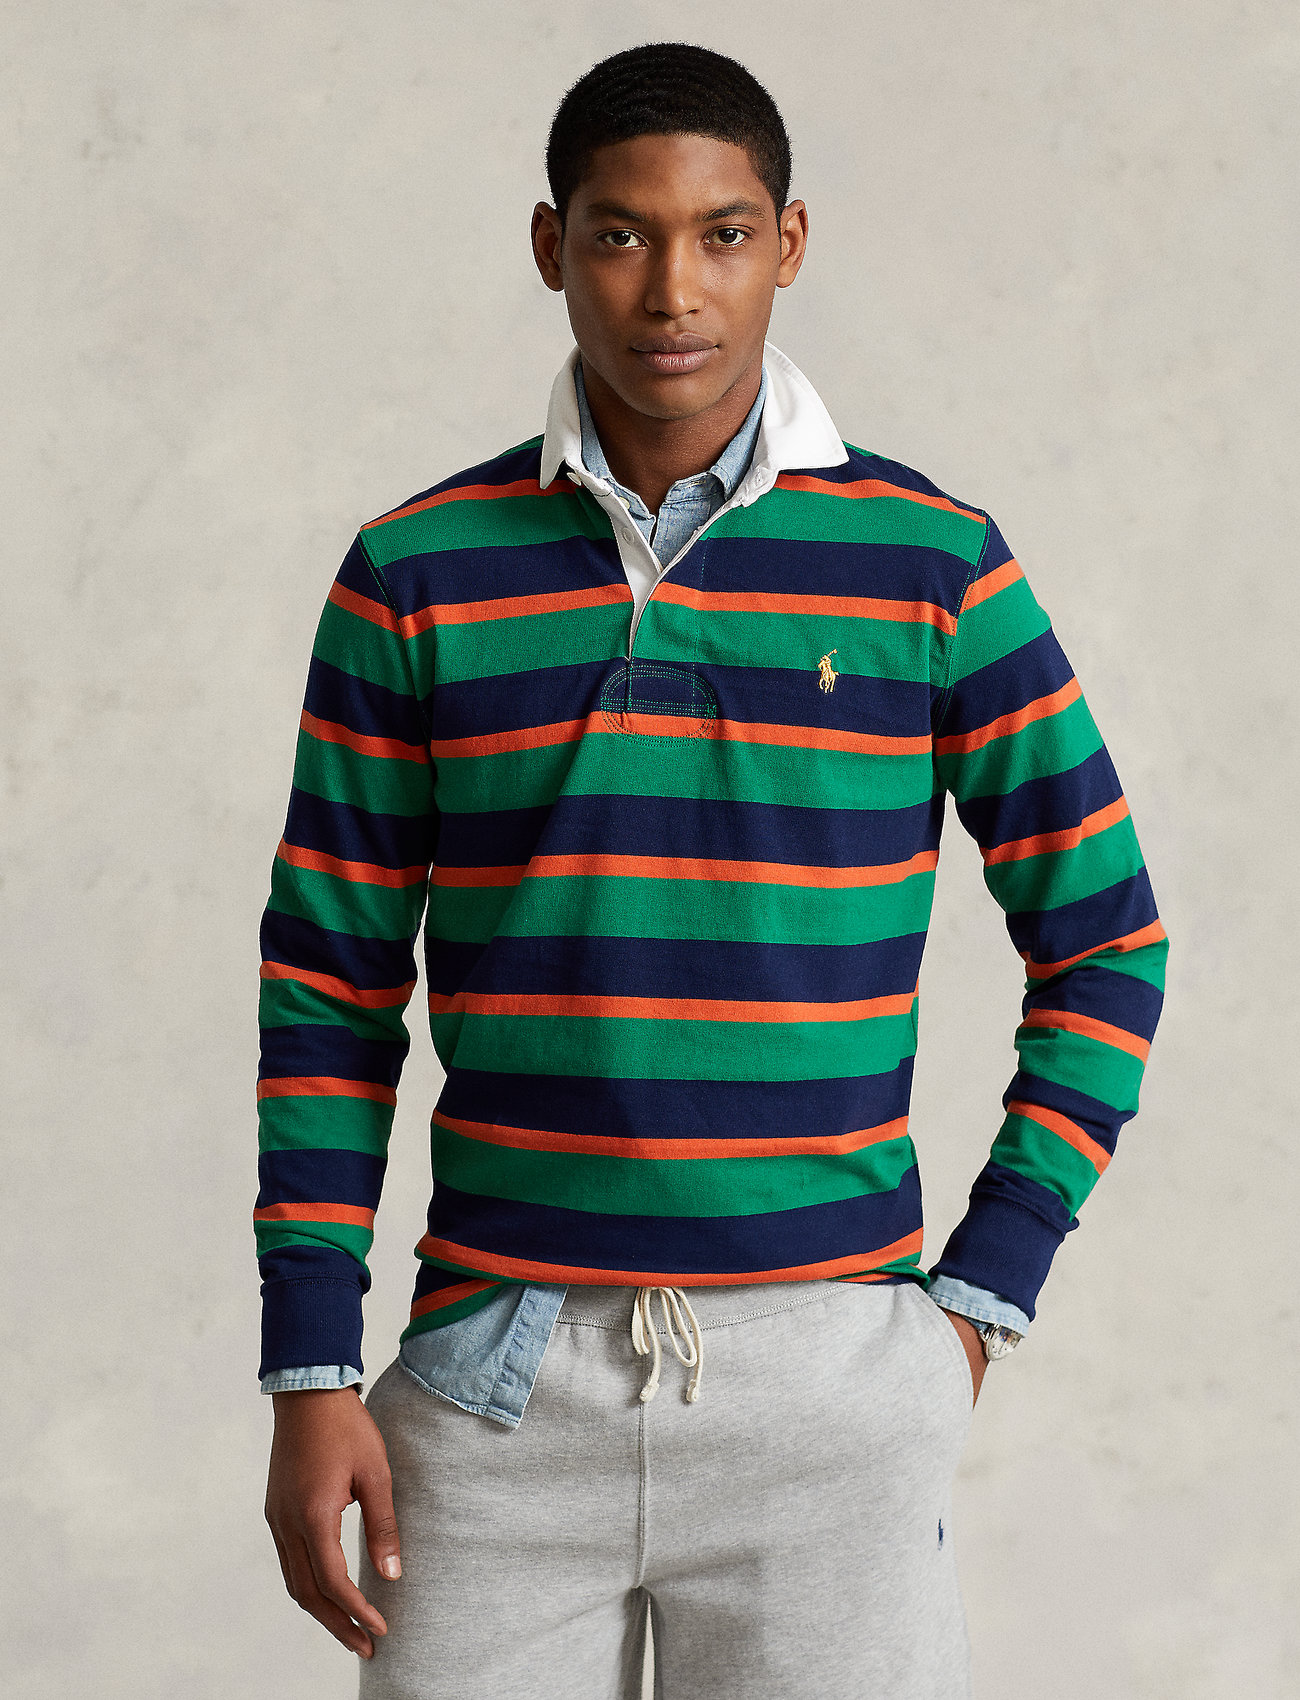 Polo Ralph Lauren The Iconic Rugby Shirt - Long-sleeved polos 